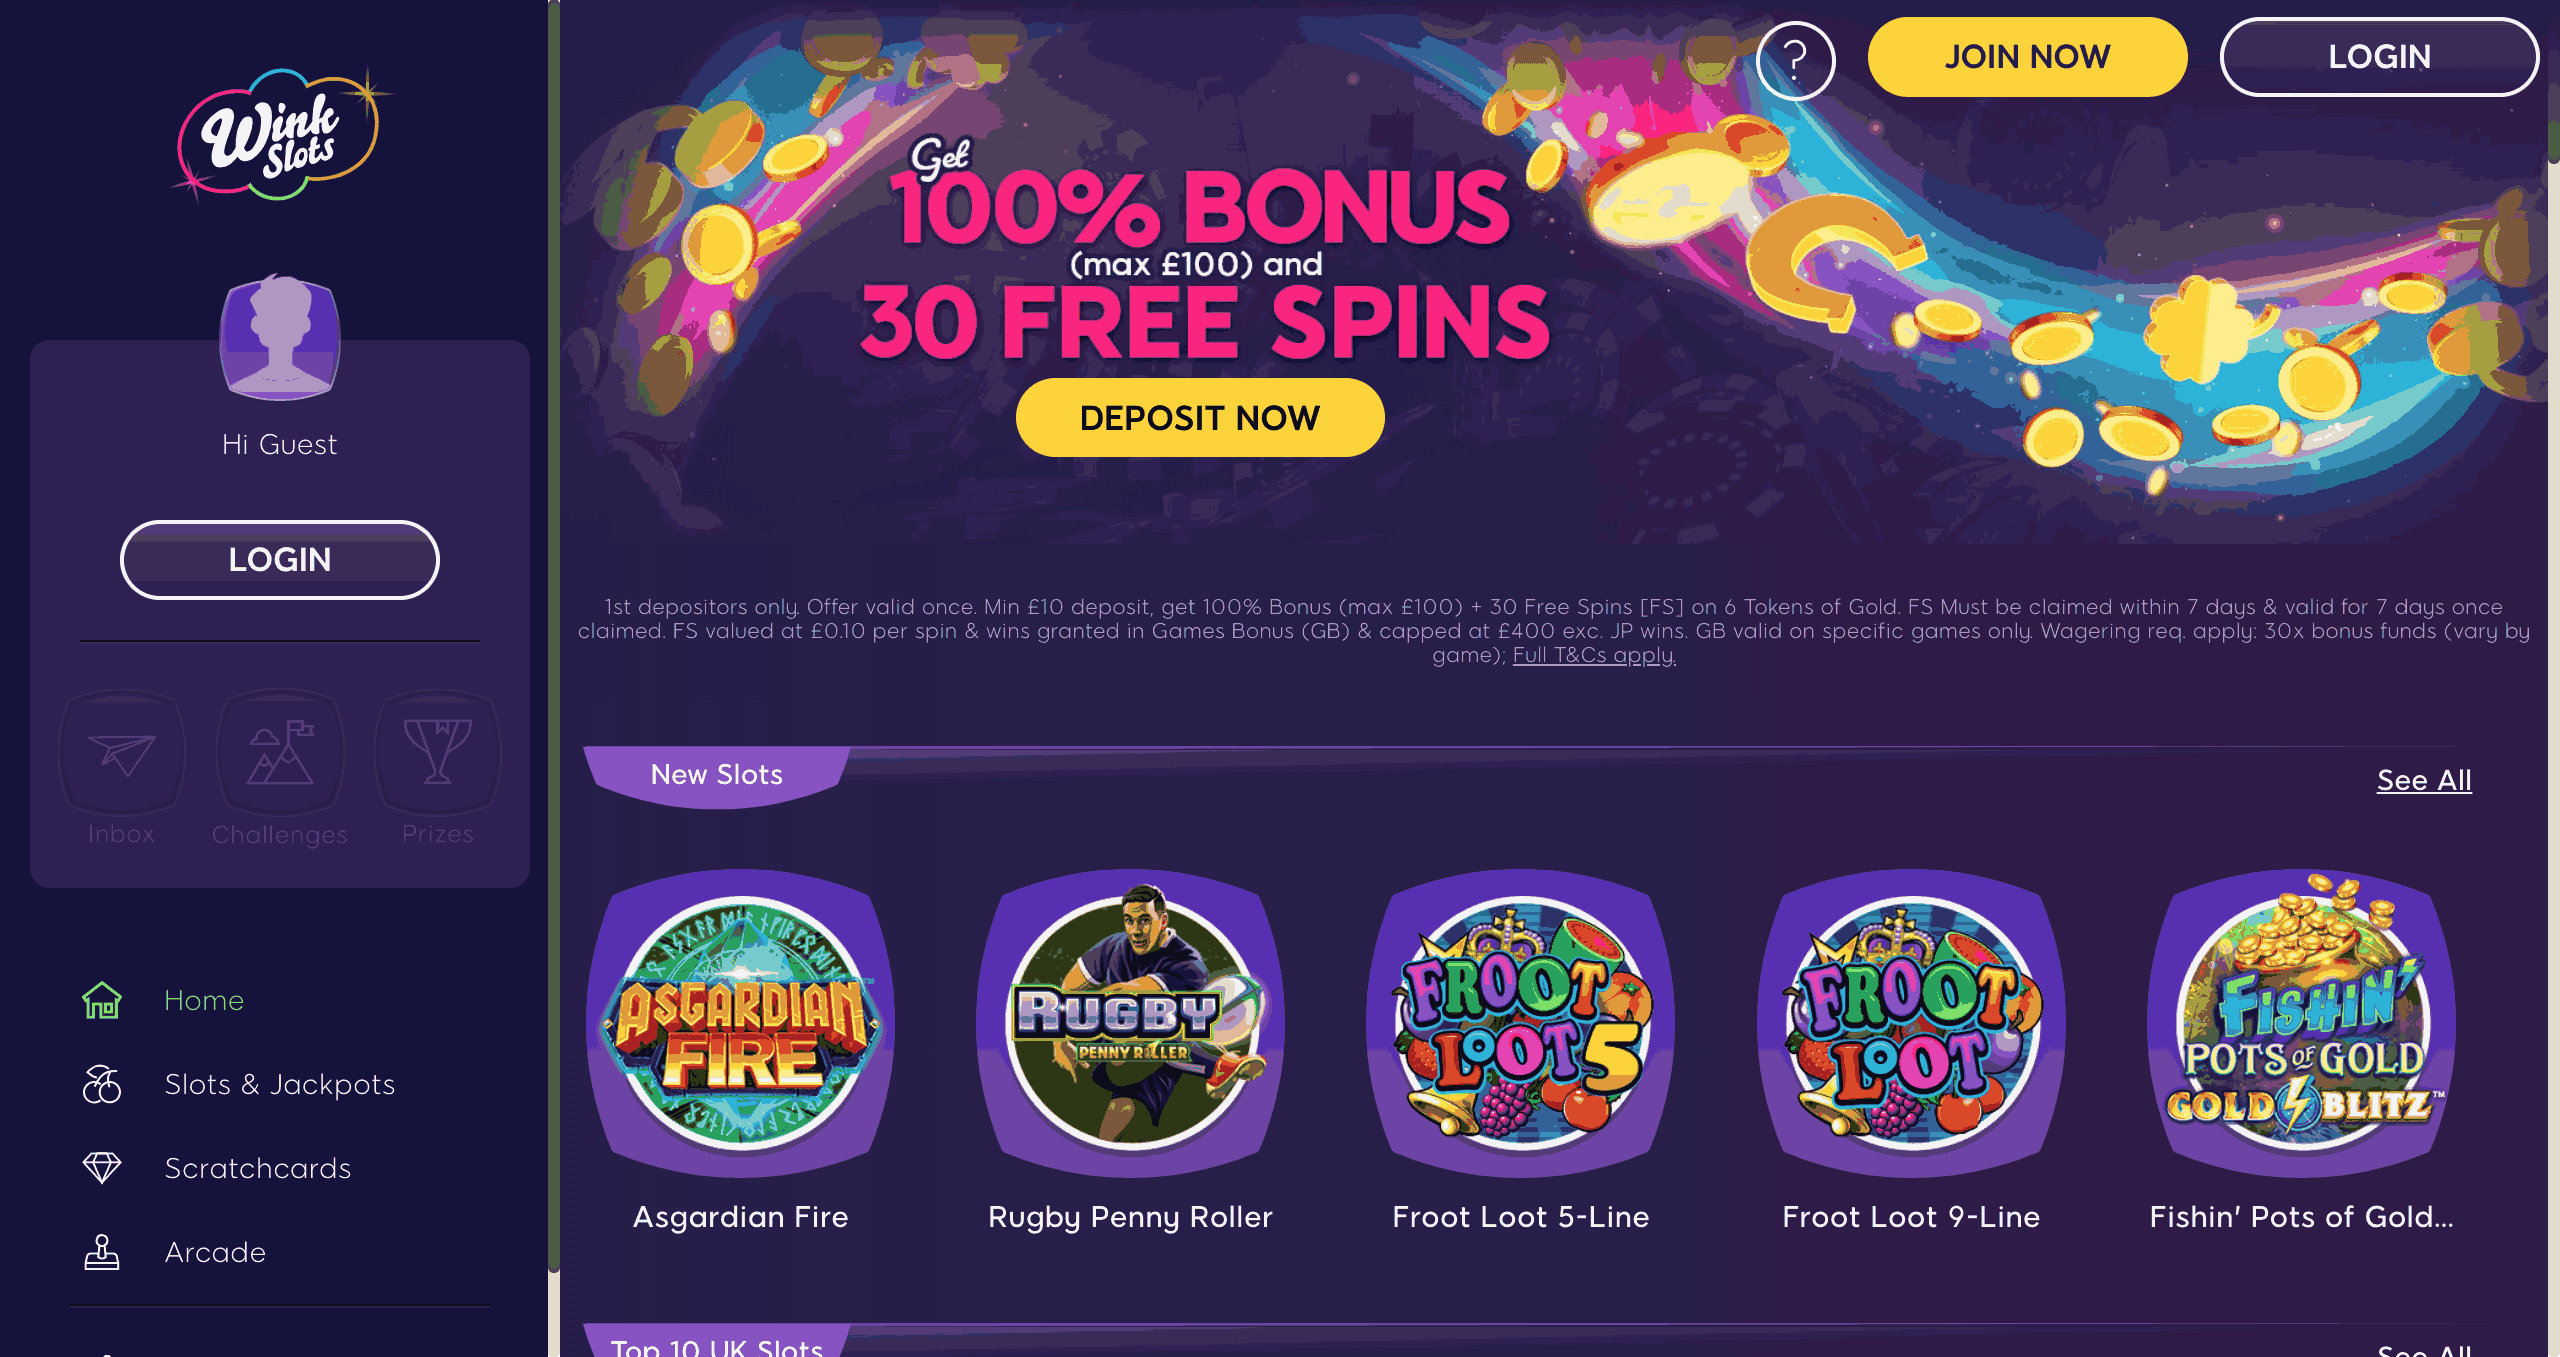 Wink Slots Review - 1